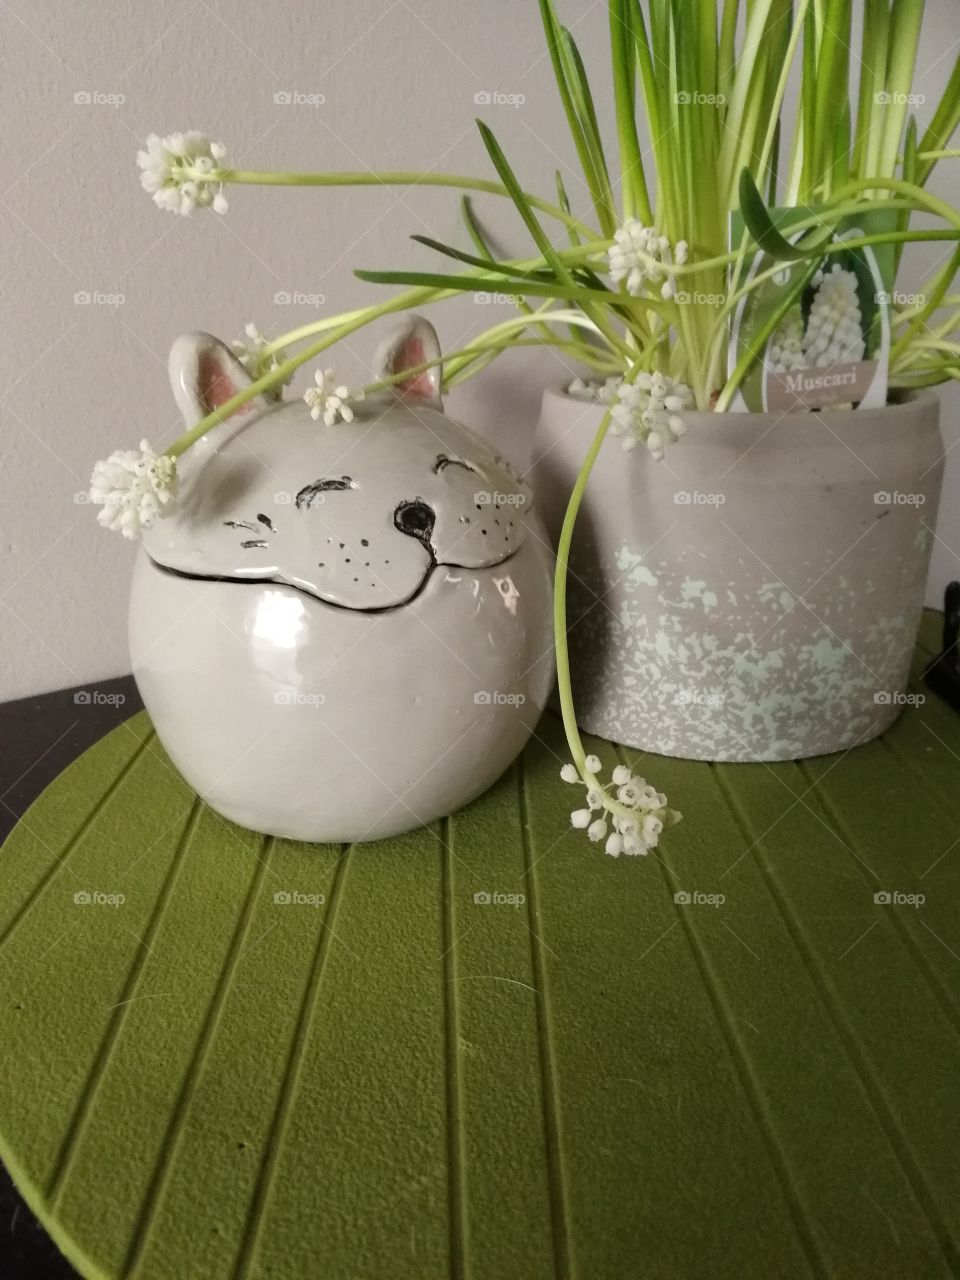 Homemade pottery and spring plant